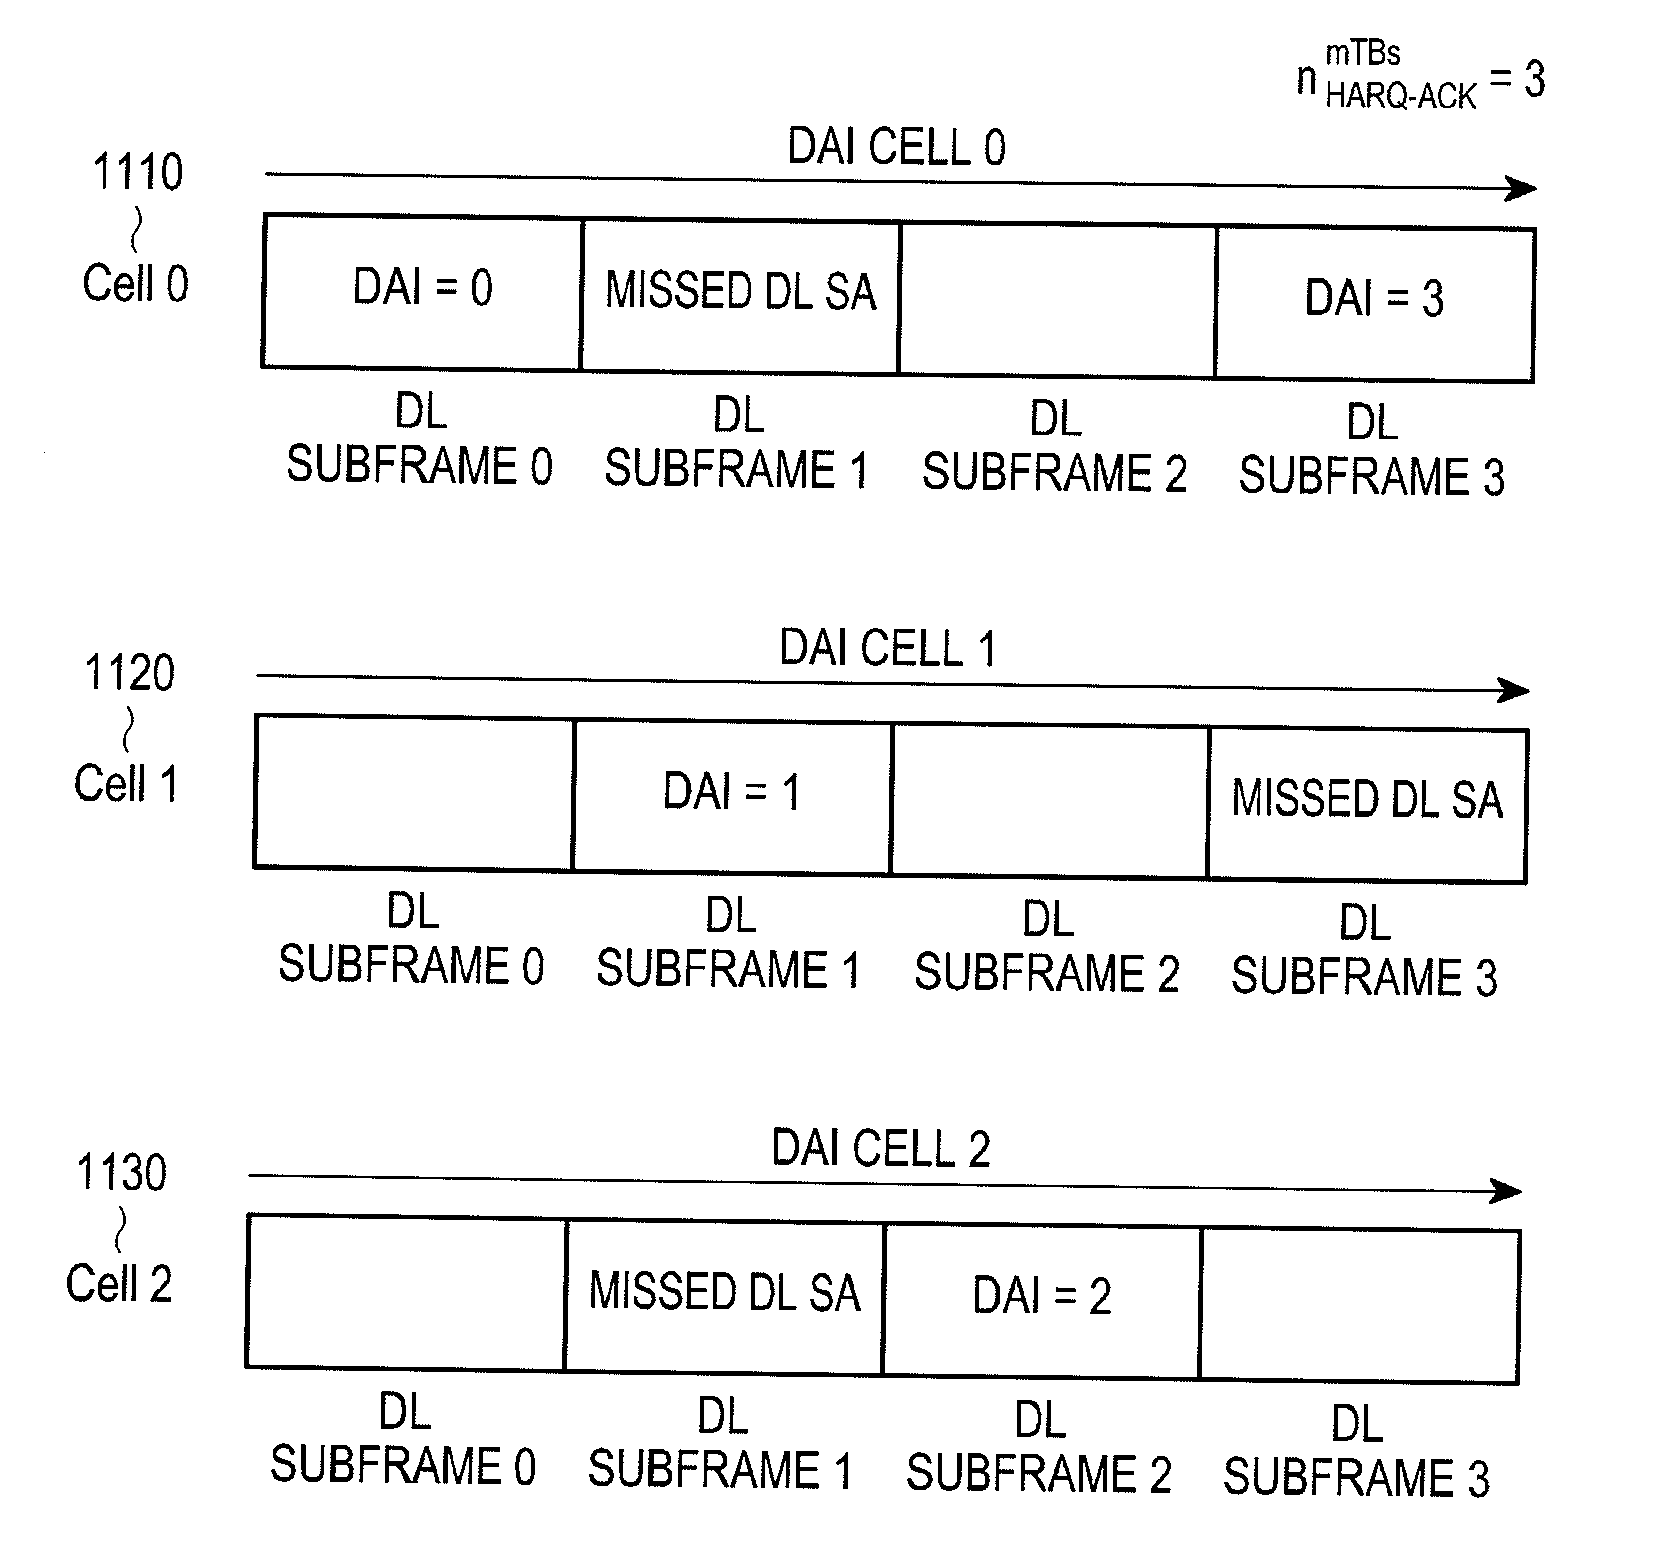 Generation of harq-ack information and power control of harq-ack signals in TDD systems with downlink of carrier aggregation